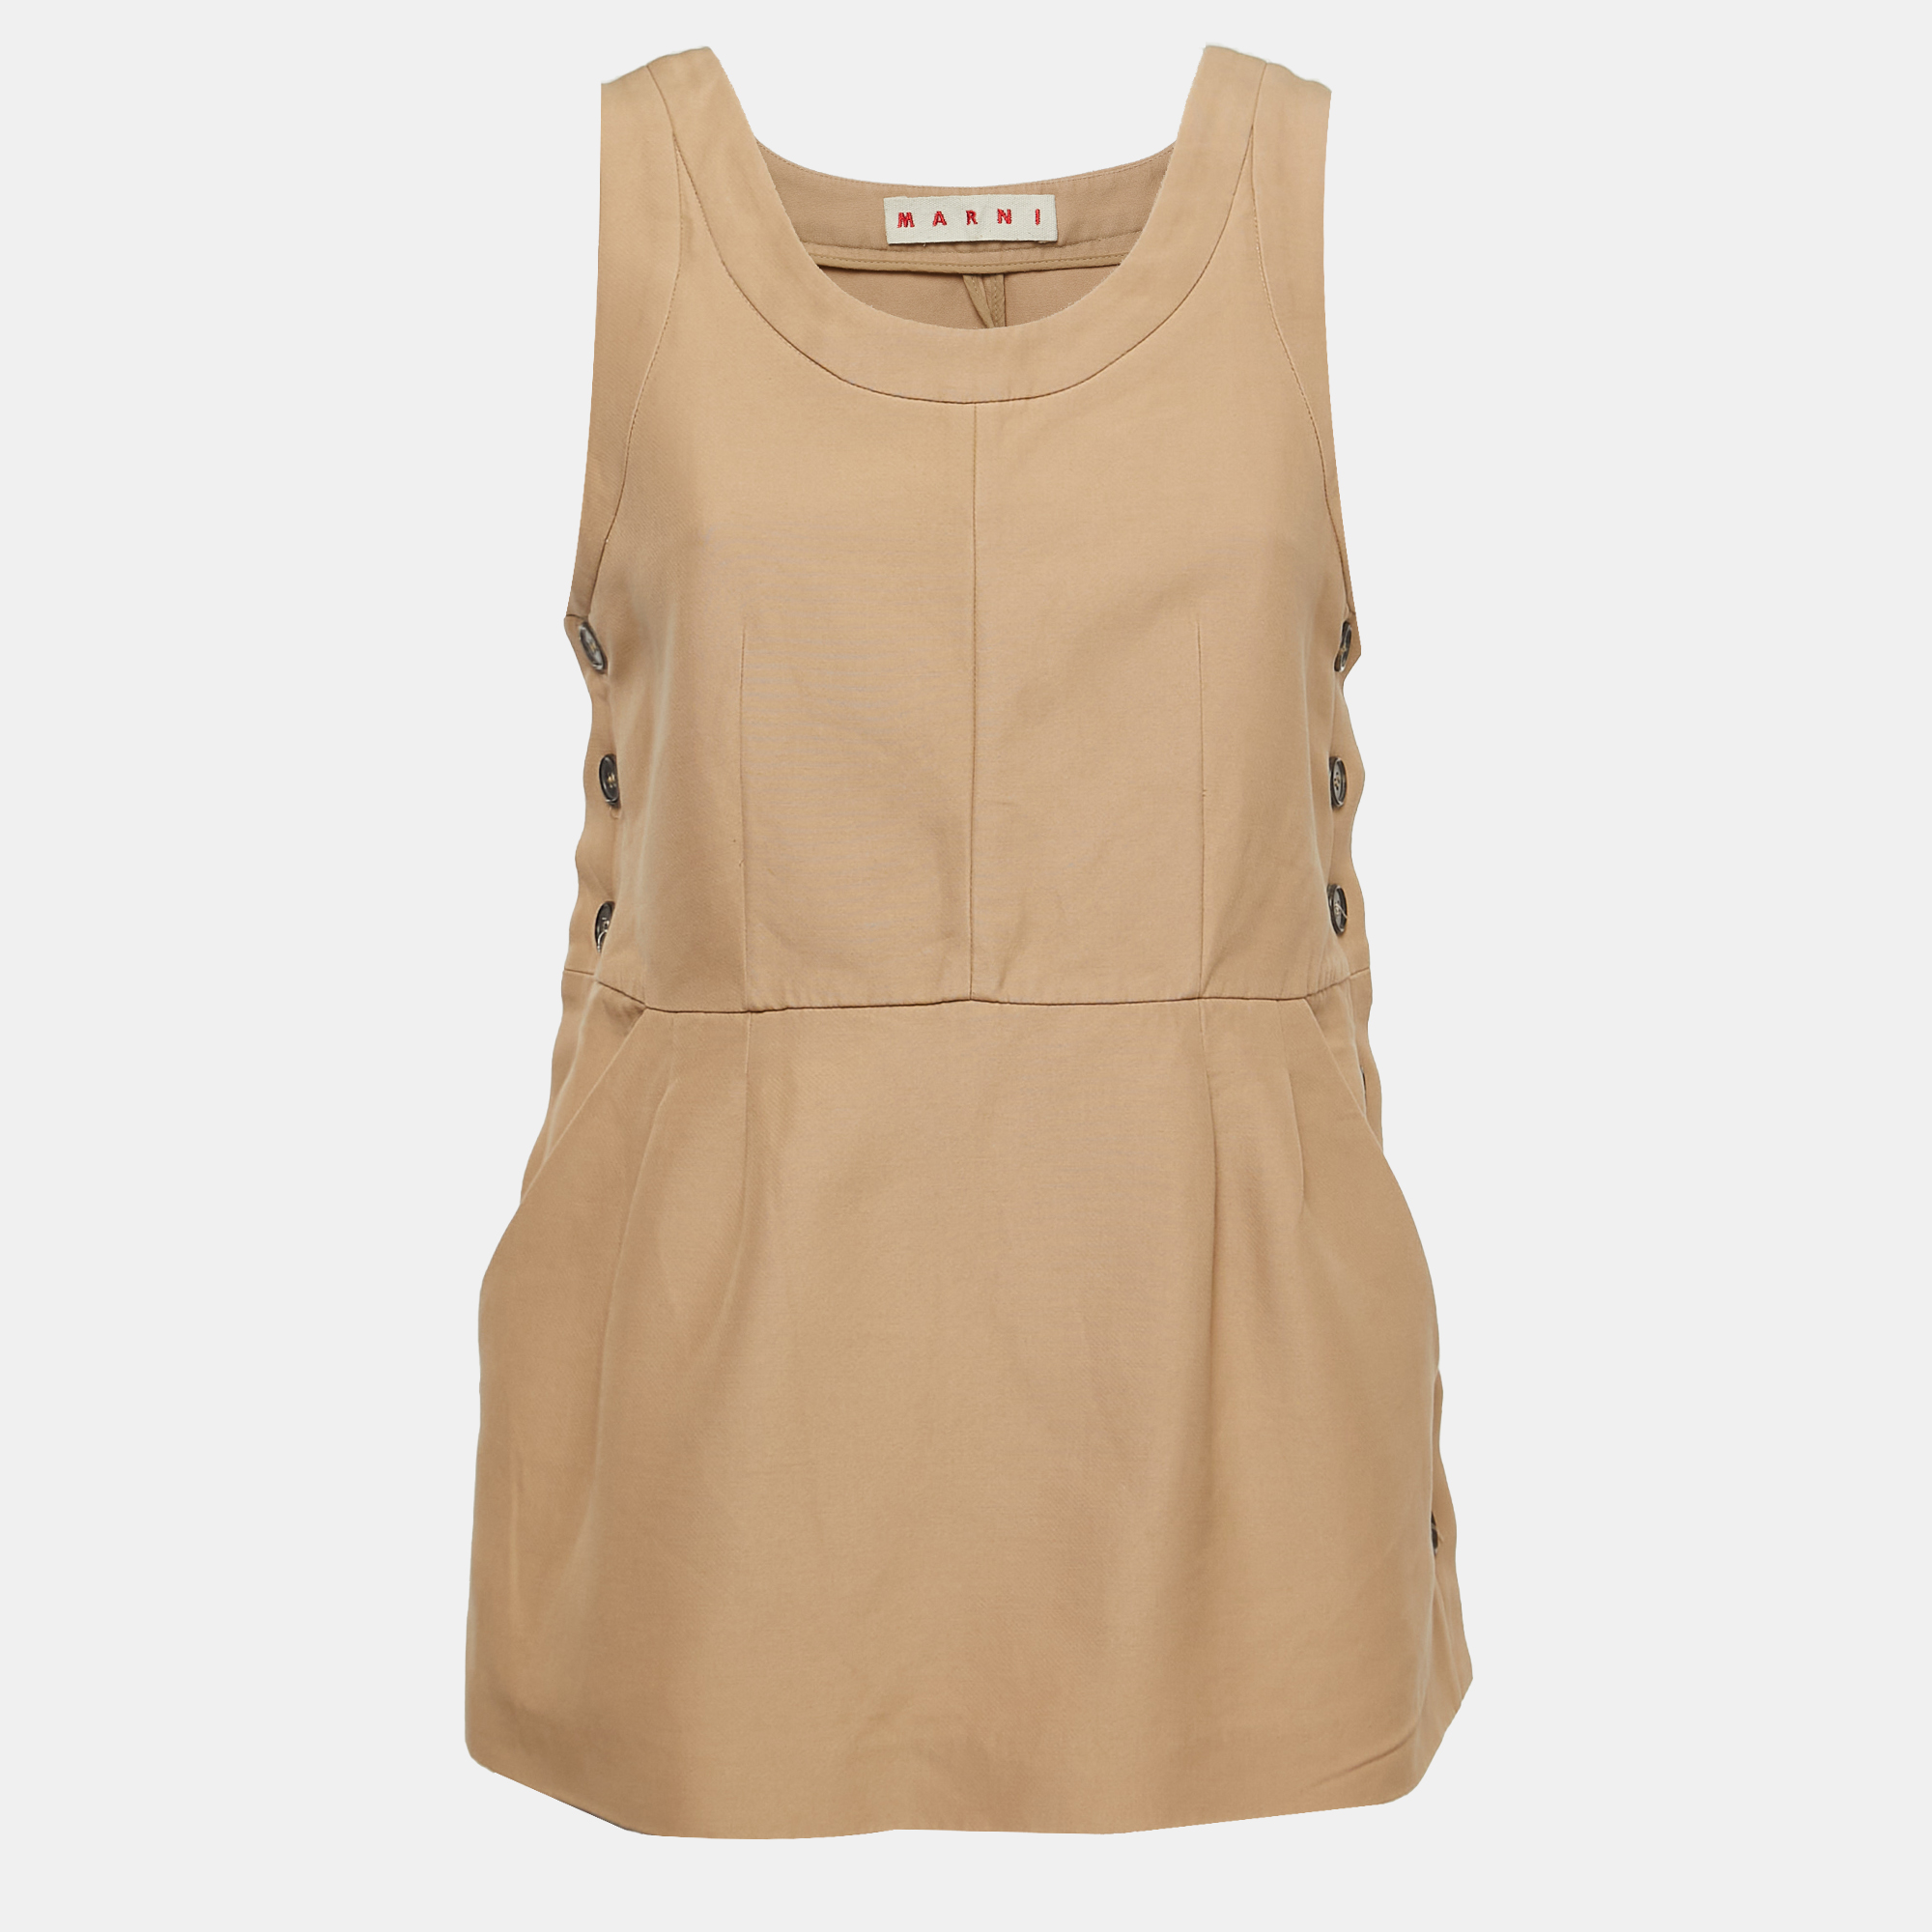 Pre-owned Marni Beige Cotton Buttoned Sleeveless Peplum Top M